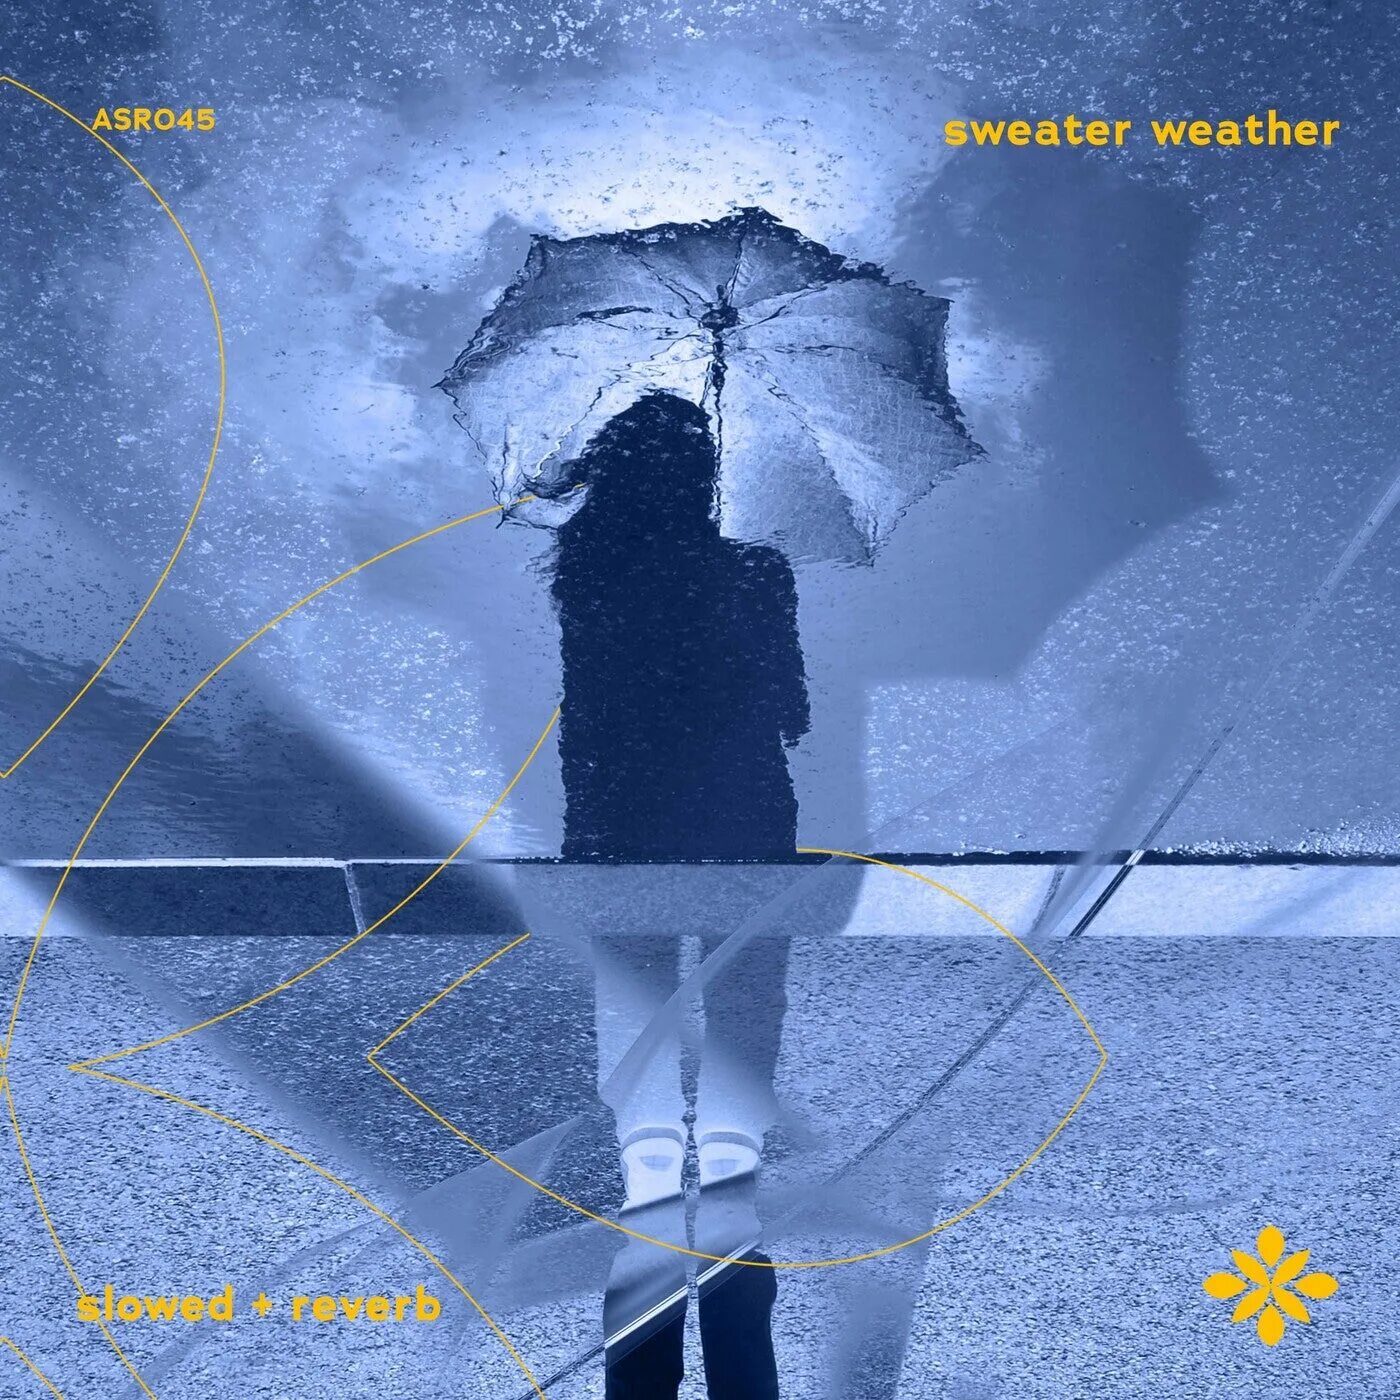 Sweater weather Slowed. Sweater weather - Slowed + Reverb Omgkirby. After Dark Sweater weather Slowed Reverb. After Dark x Sweater weather (Slowed + Reverb).